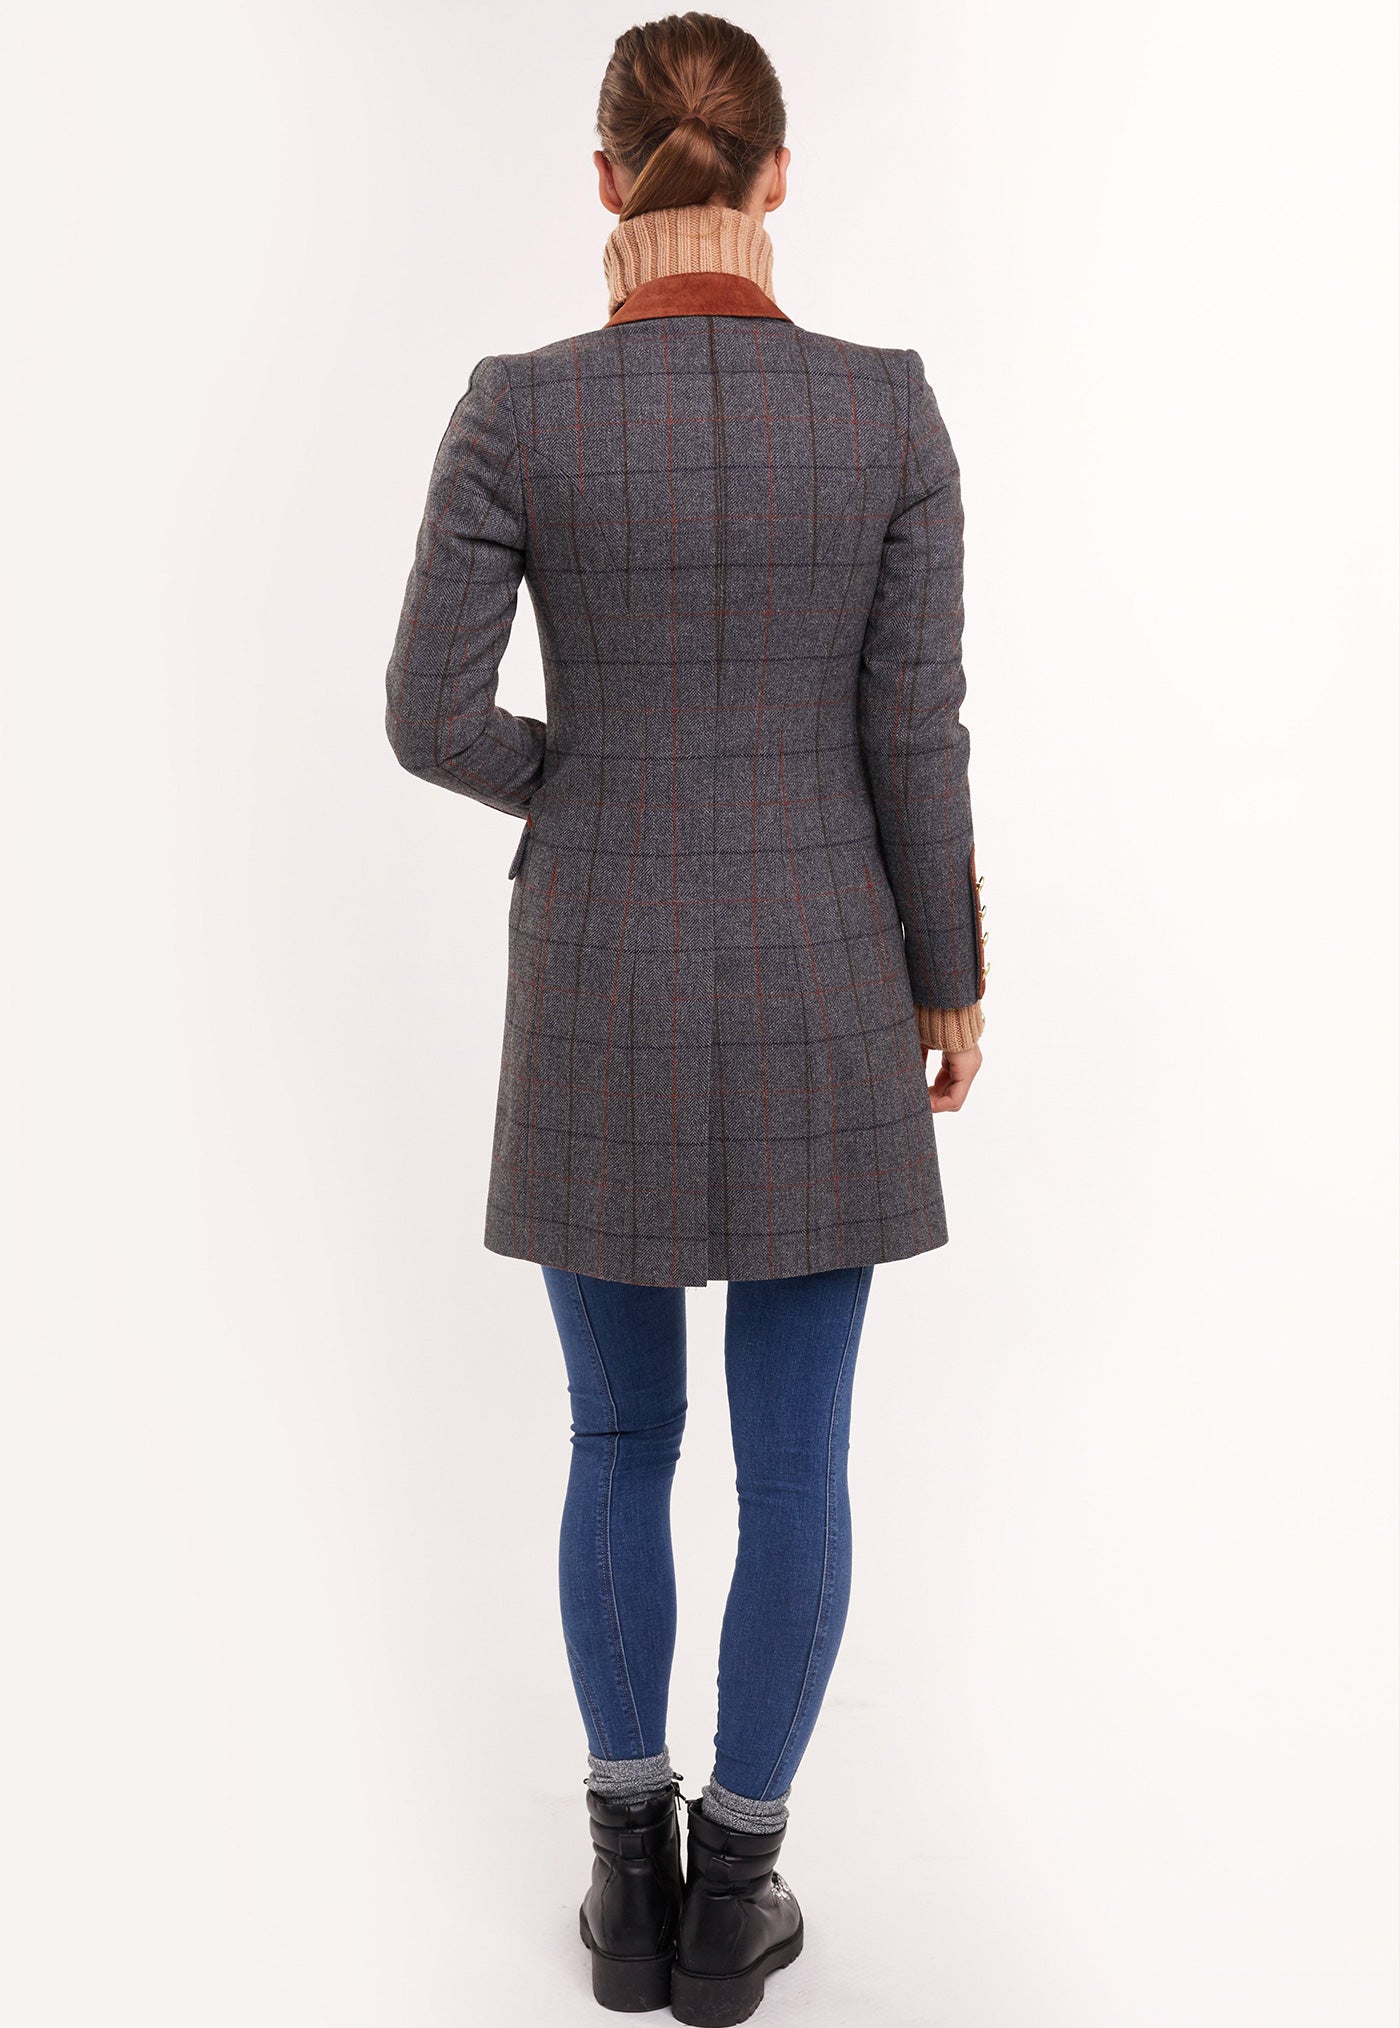 Kempton Coat - Mid Blue Check sold by Angel Divine